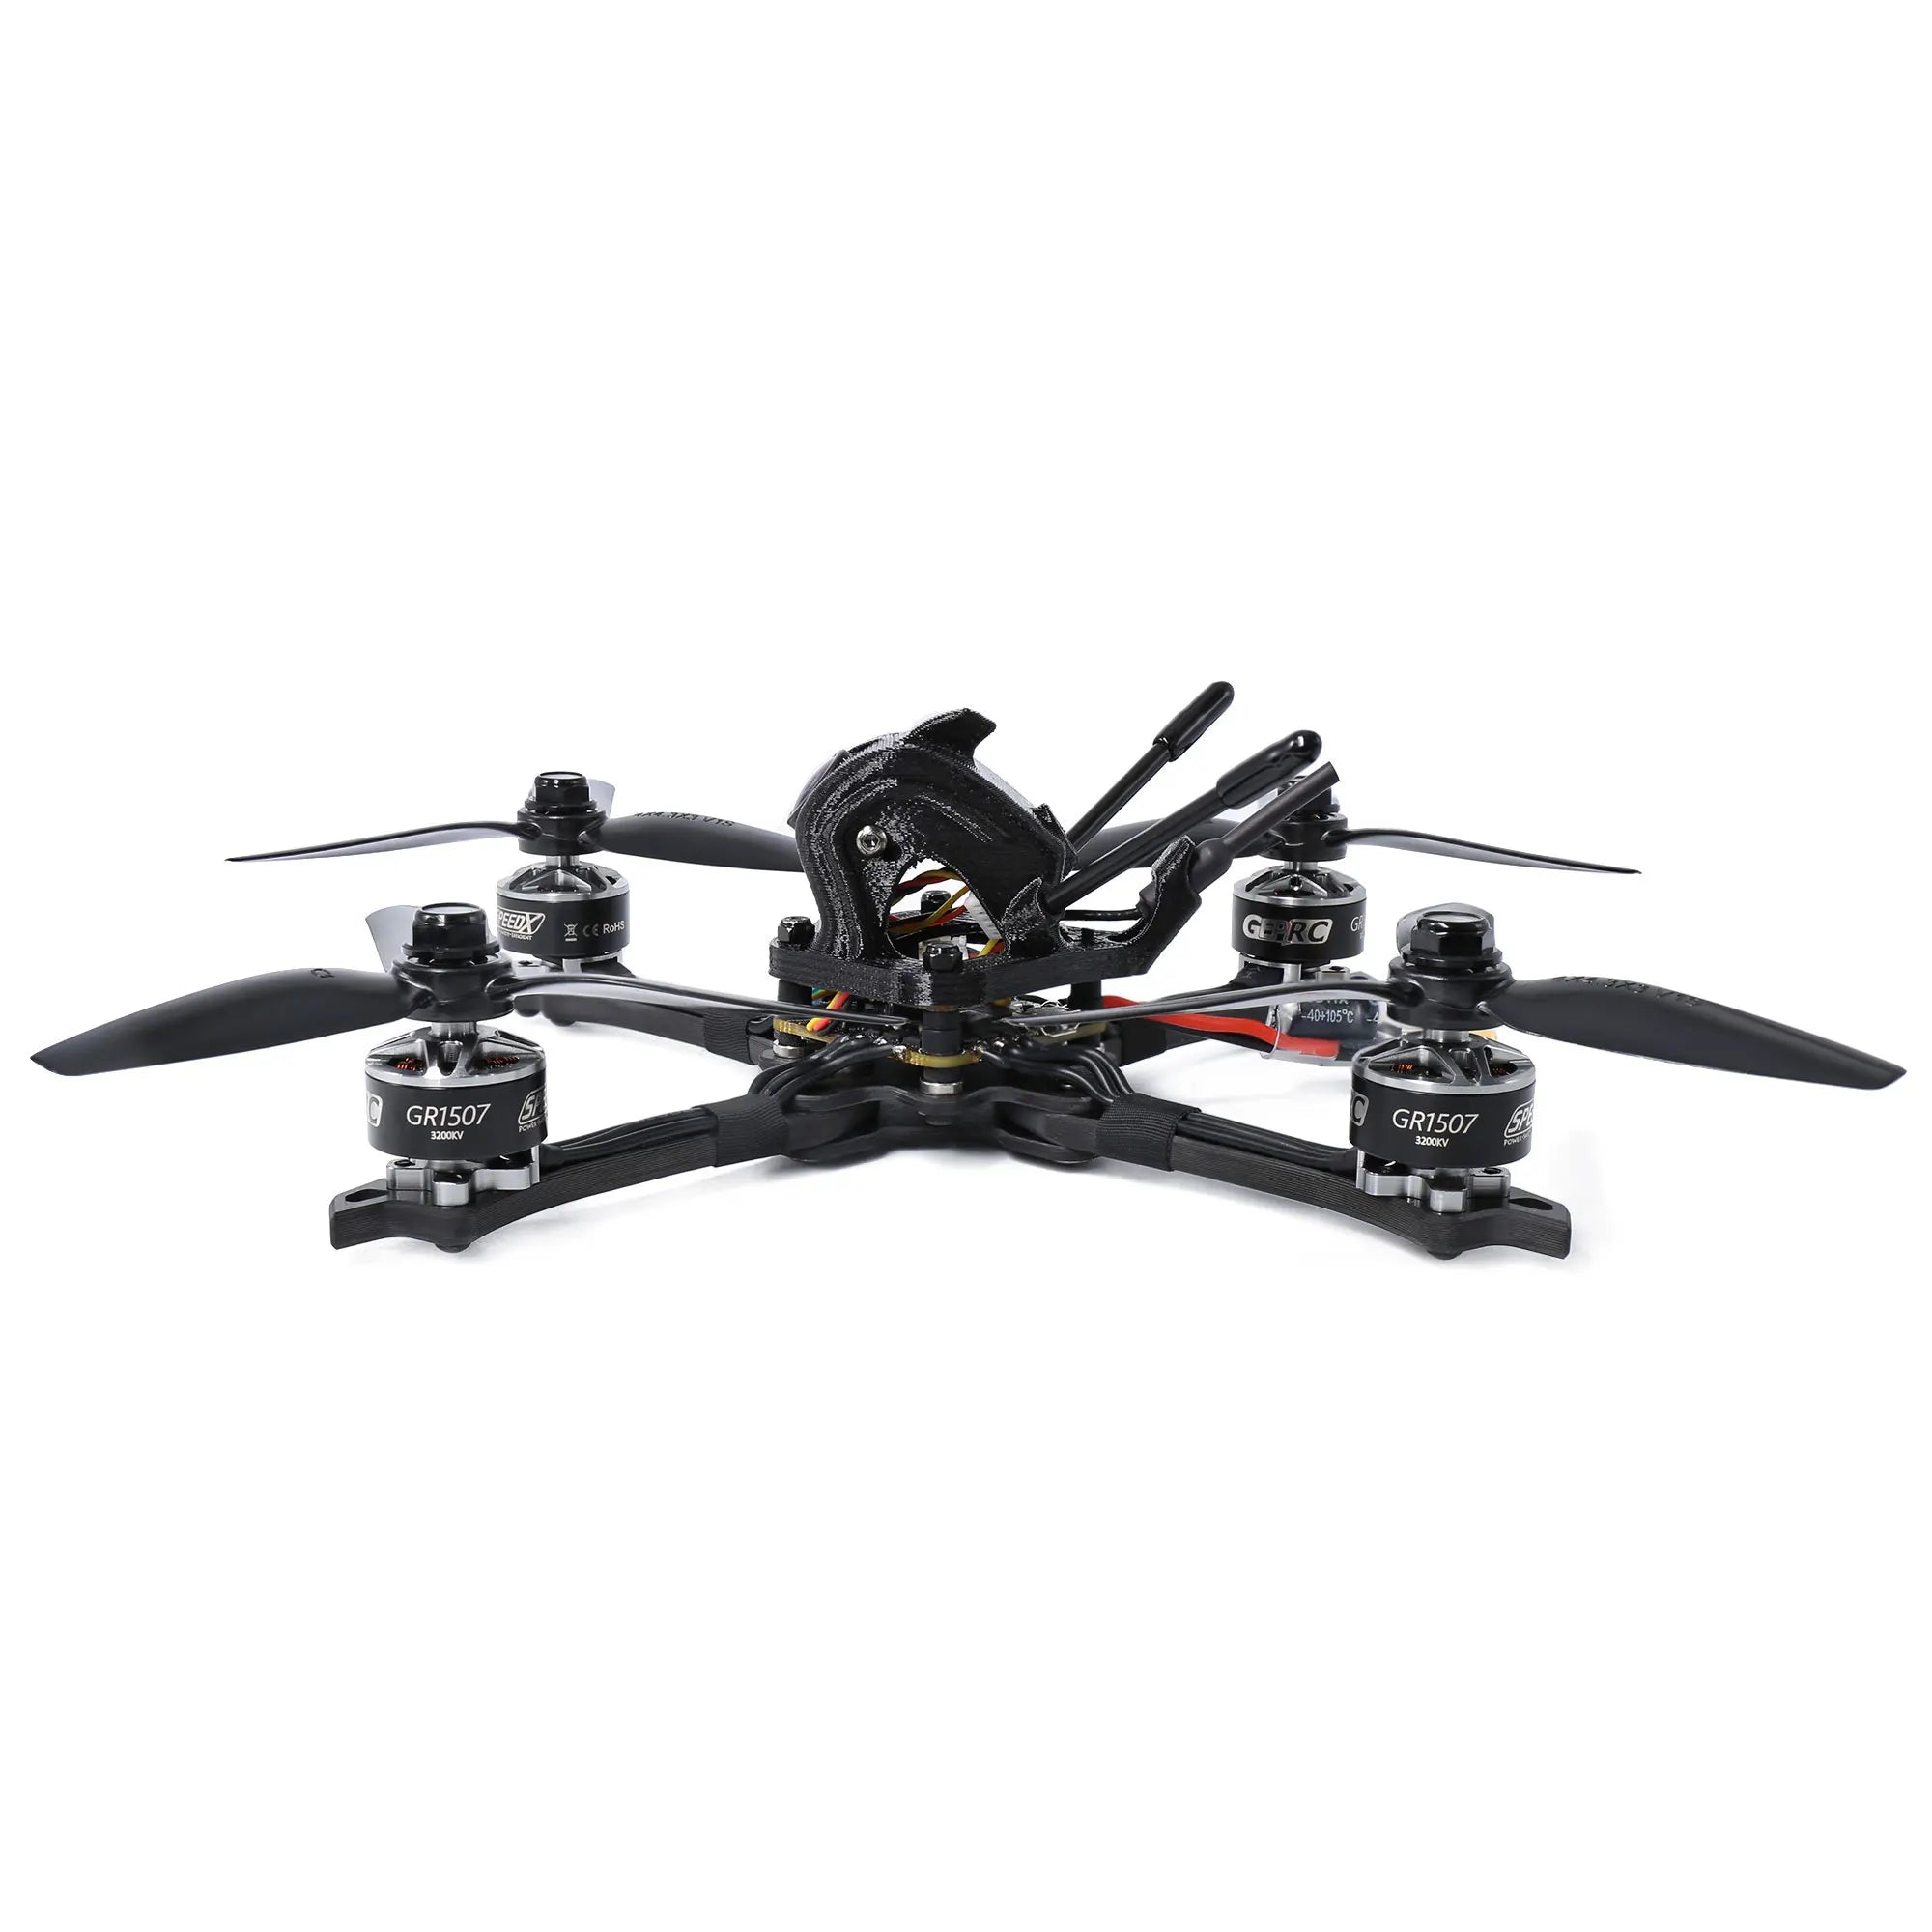 GEPRC Dolphin ToothPick FPV Drone, Firmware target MATEKF411 (MK41), built-in Betaf